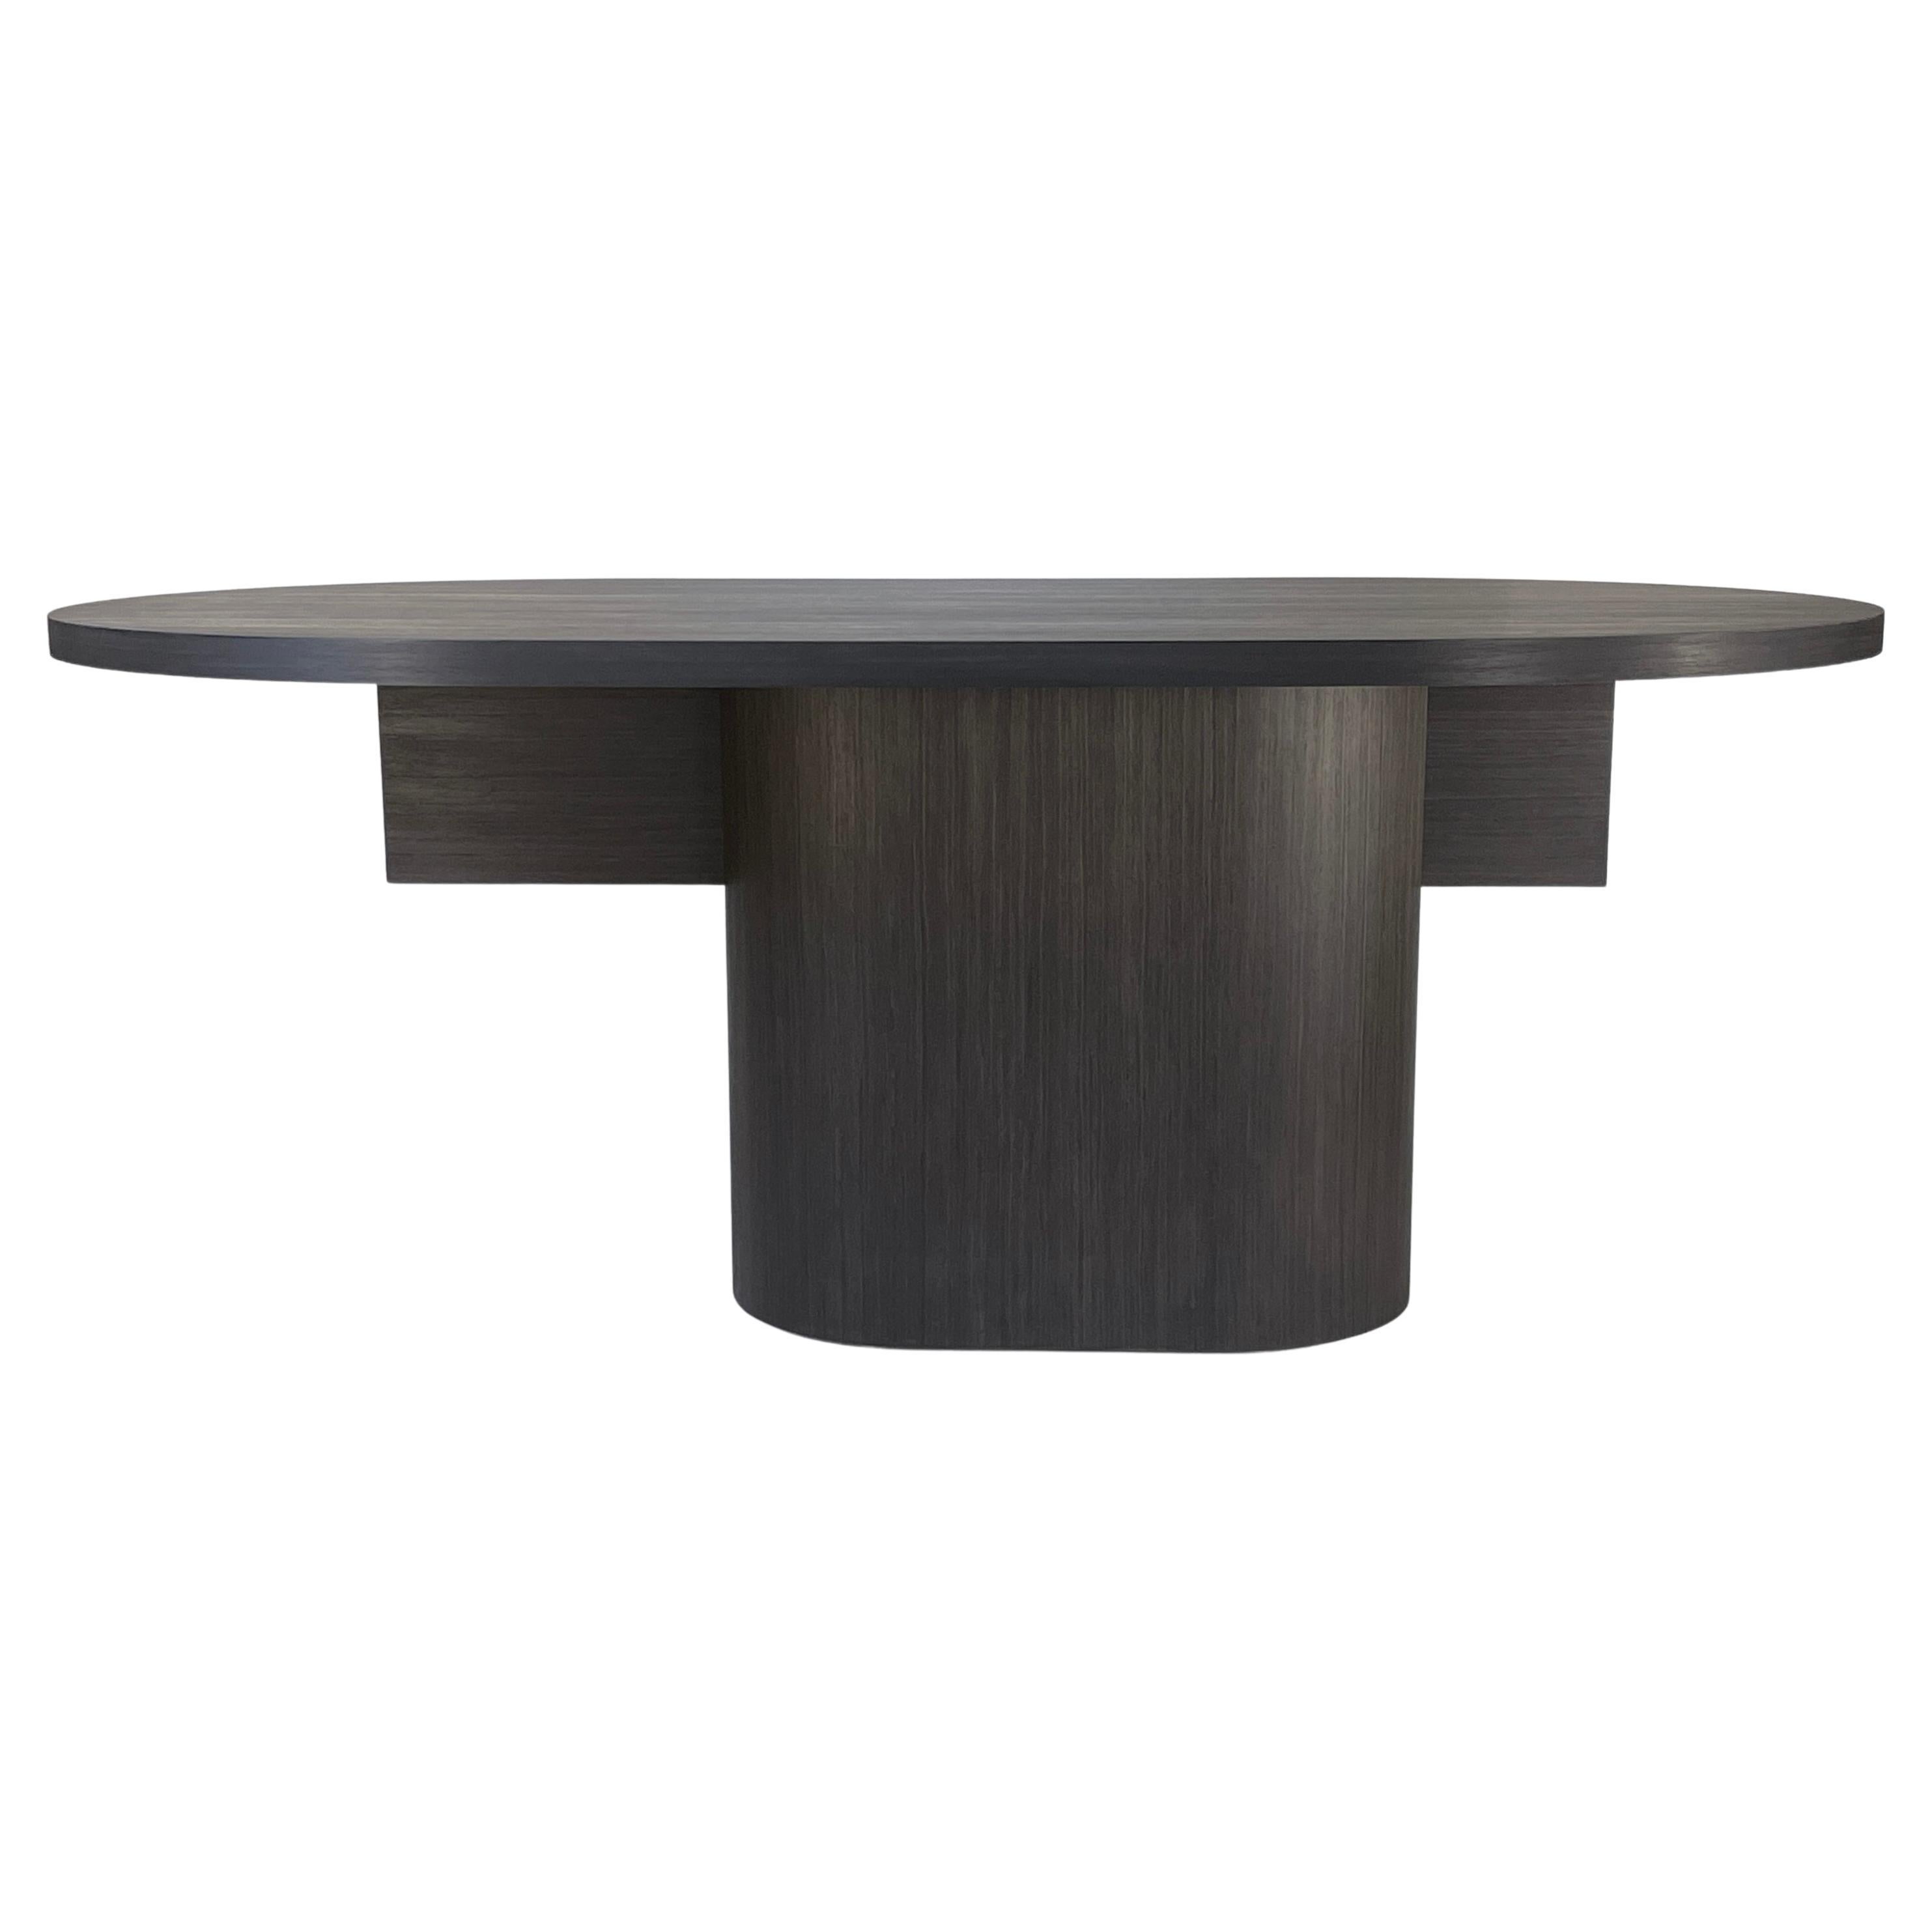 Sebring, the Latest and Most Versatile Table from William Earle